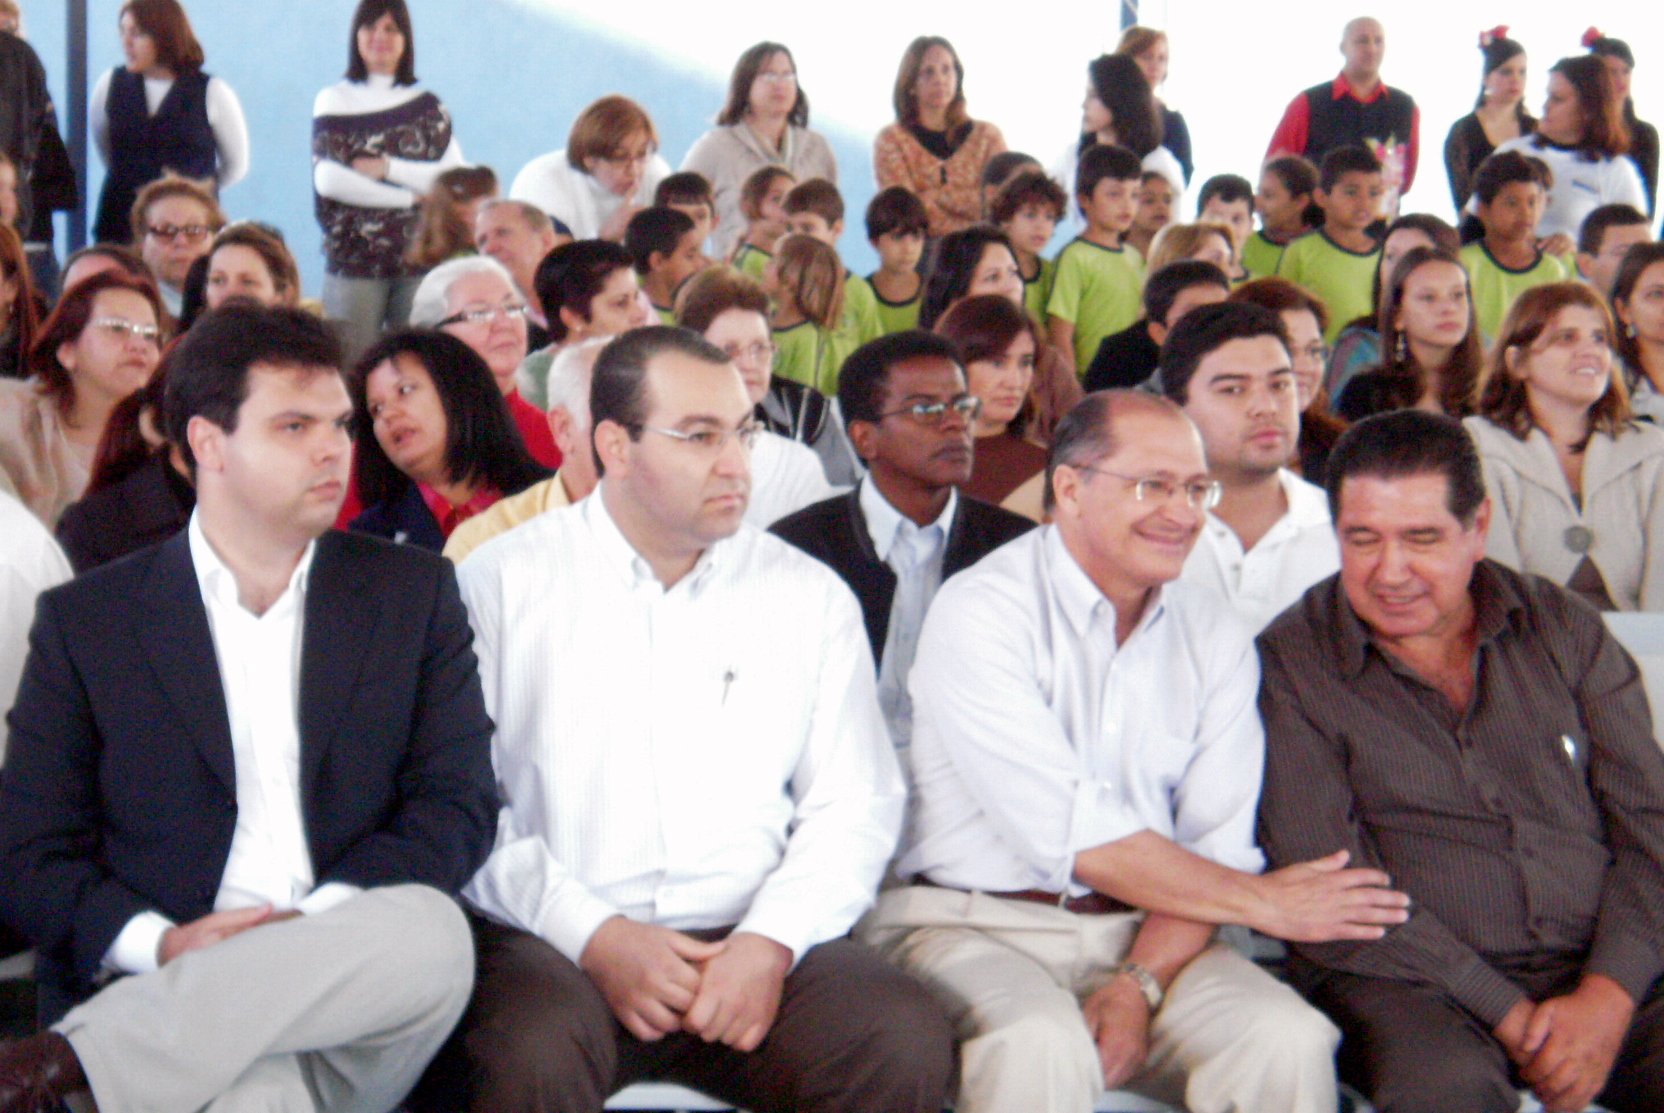 people sitting in front of a crowd at a religious event